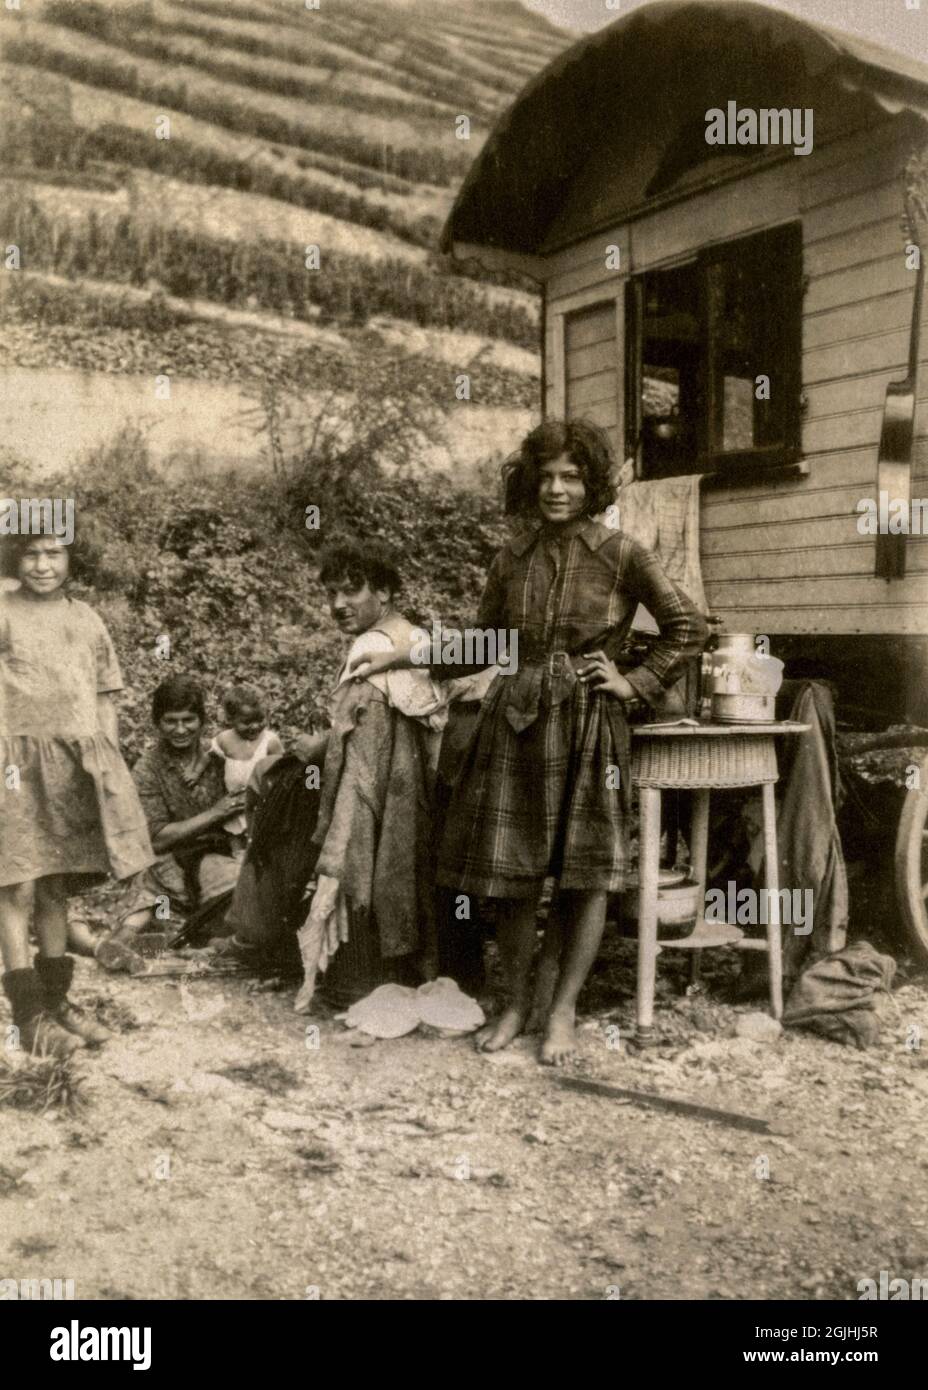 A gypsy or Roma family in Germany or France in the late 1920s or early 1930s, beside their traditional wooden caravan and with a hillside cultivated with rows of vines rising behind.  Smiling and apparently carefree before the Second World War and rigorous enforcement of anti-gypsy legislation by the Nazi regime.  Vintage photograph. Stock Photo